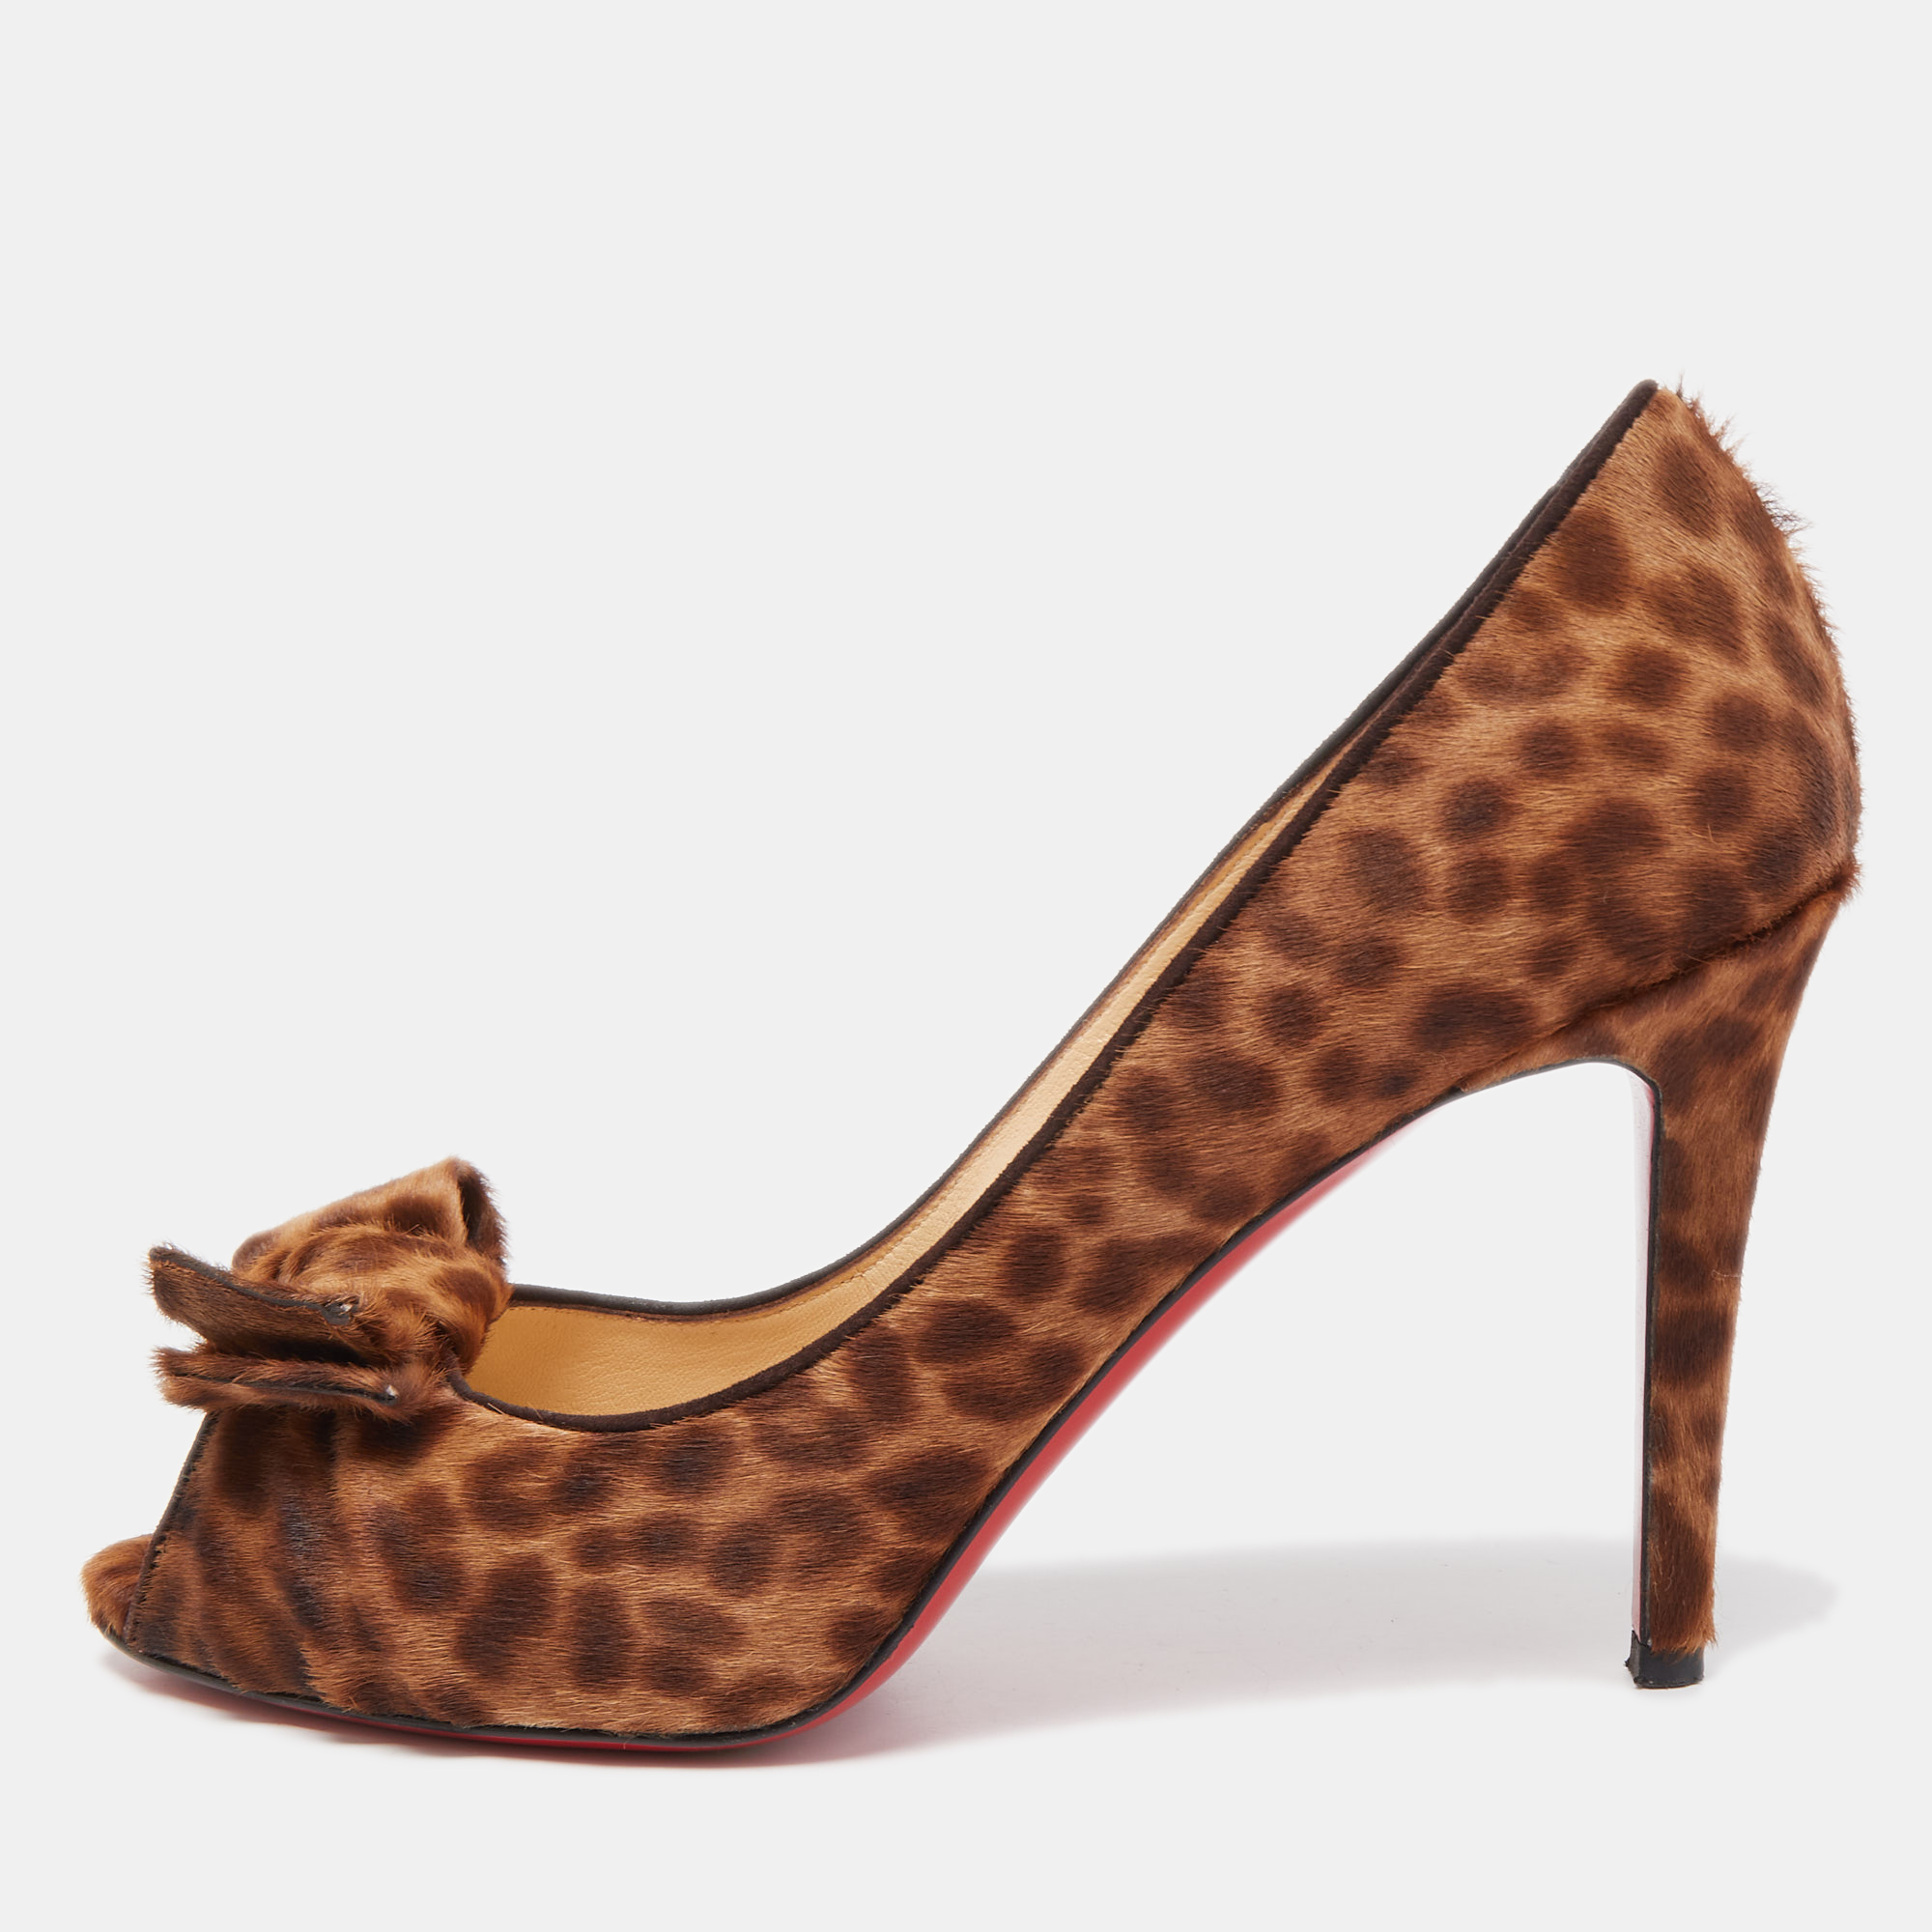 Pre-owned Christian Louboutin Brown Leopard Print Calf Hair Bow Peep Toe Pumps Size 37.5